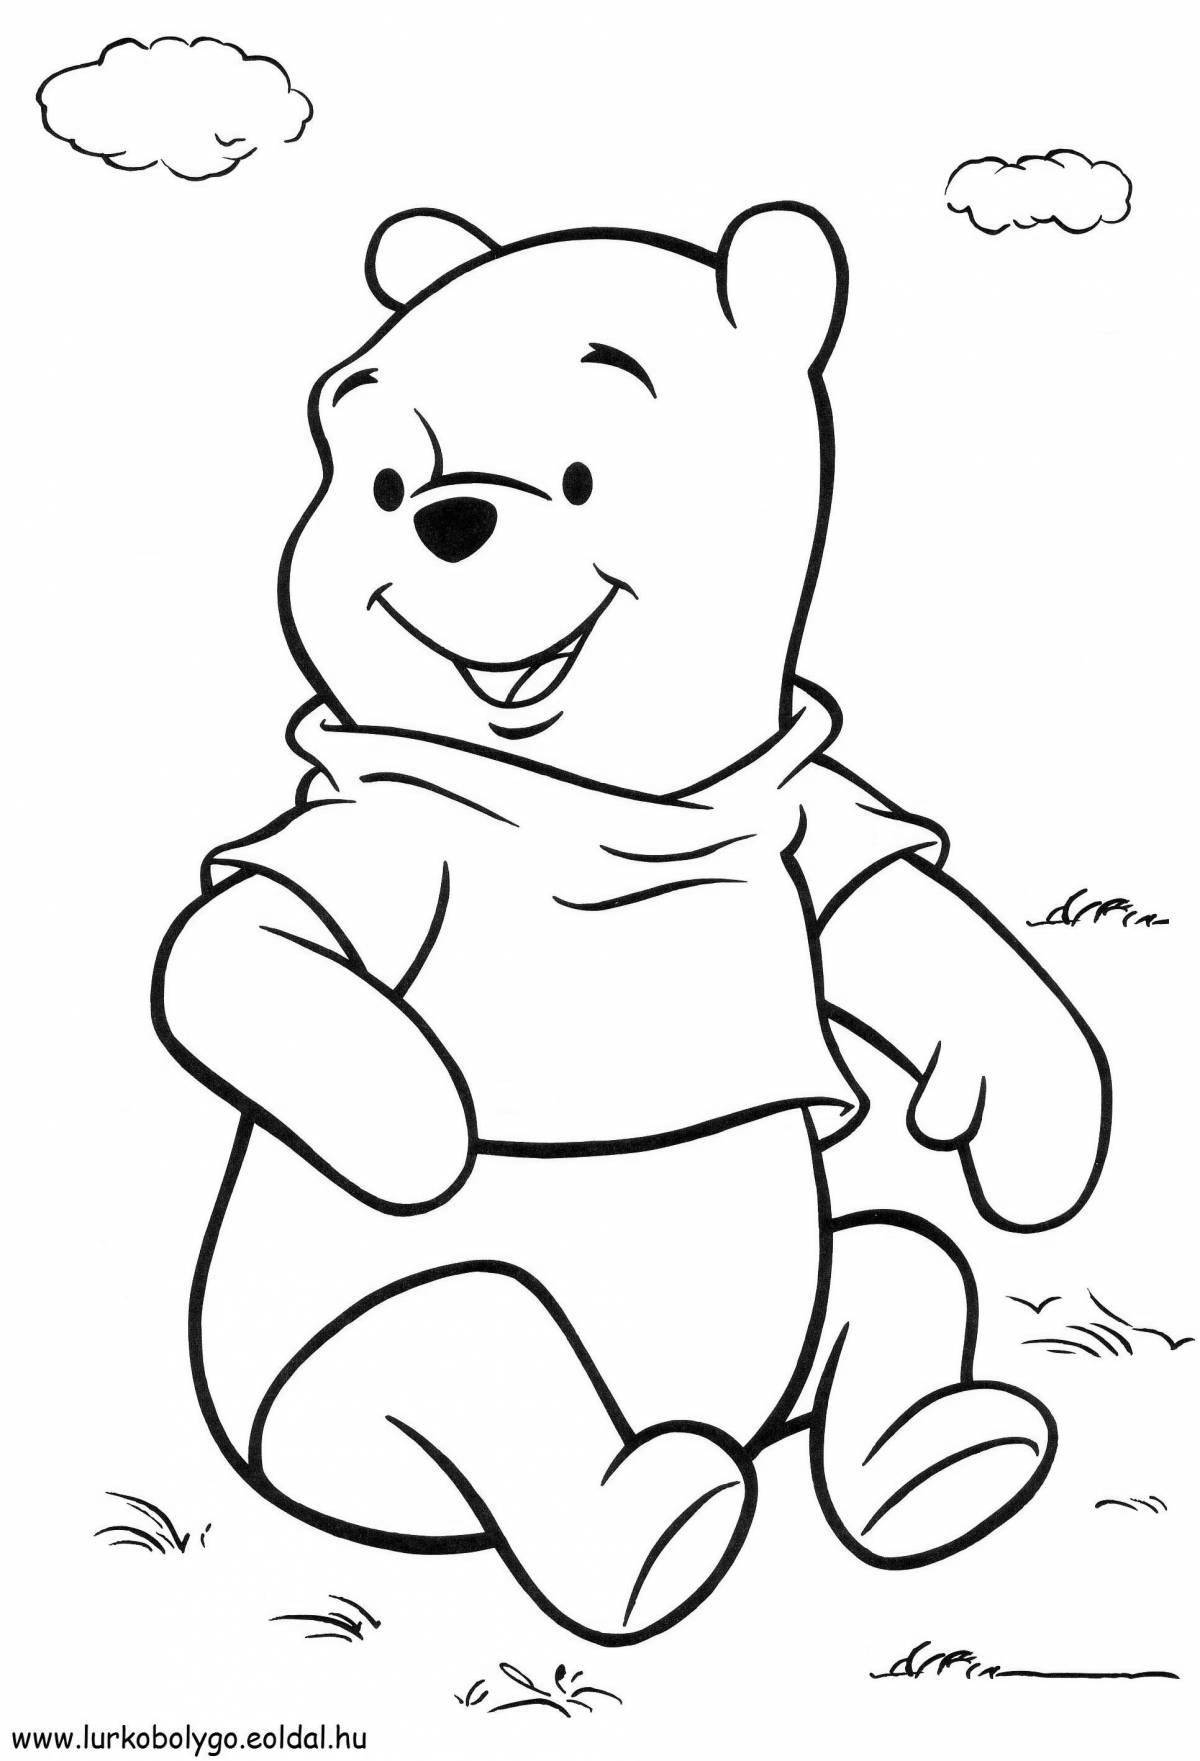 Winnie the pooh soulful coloring book for kids